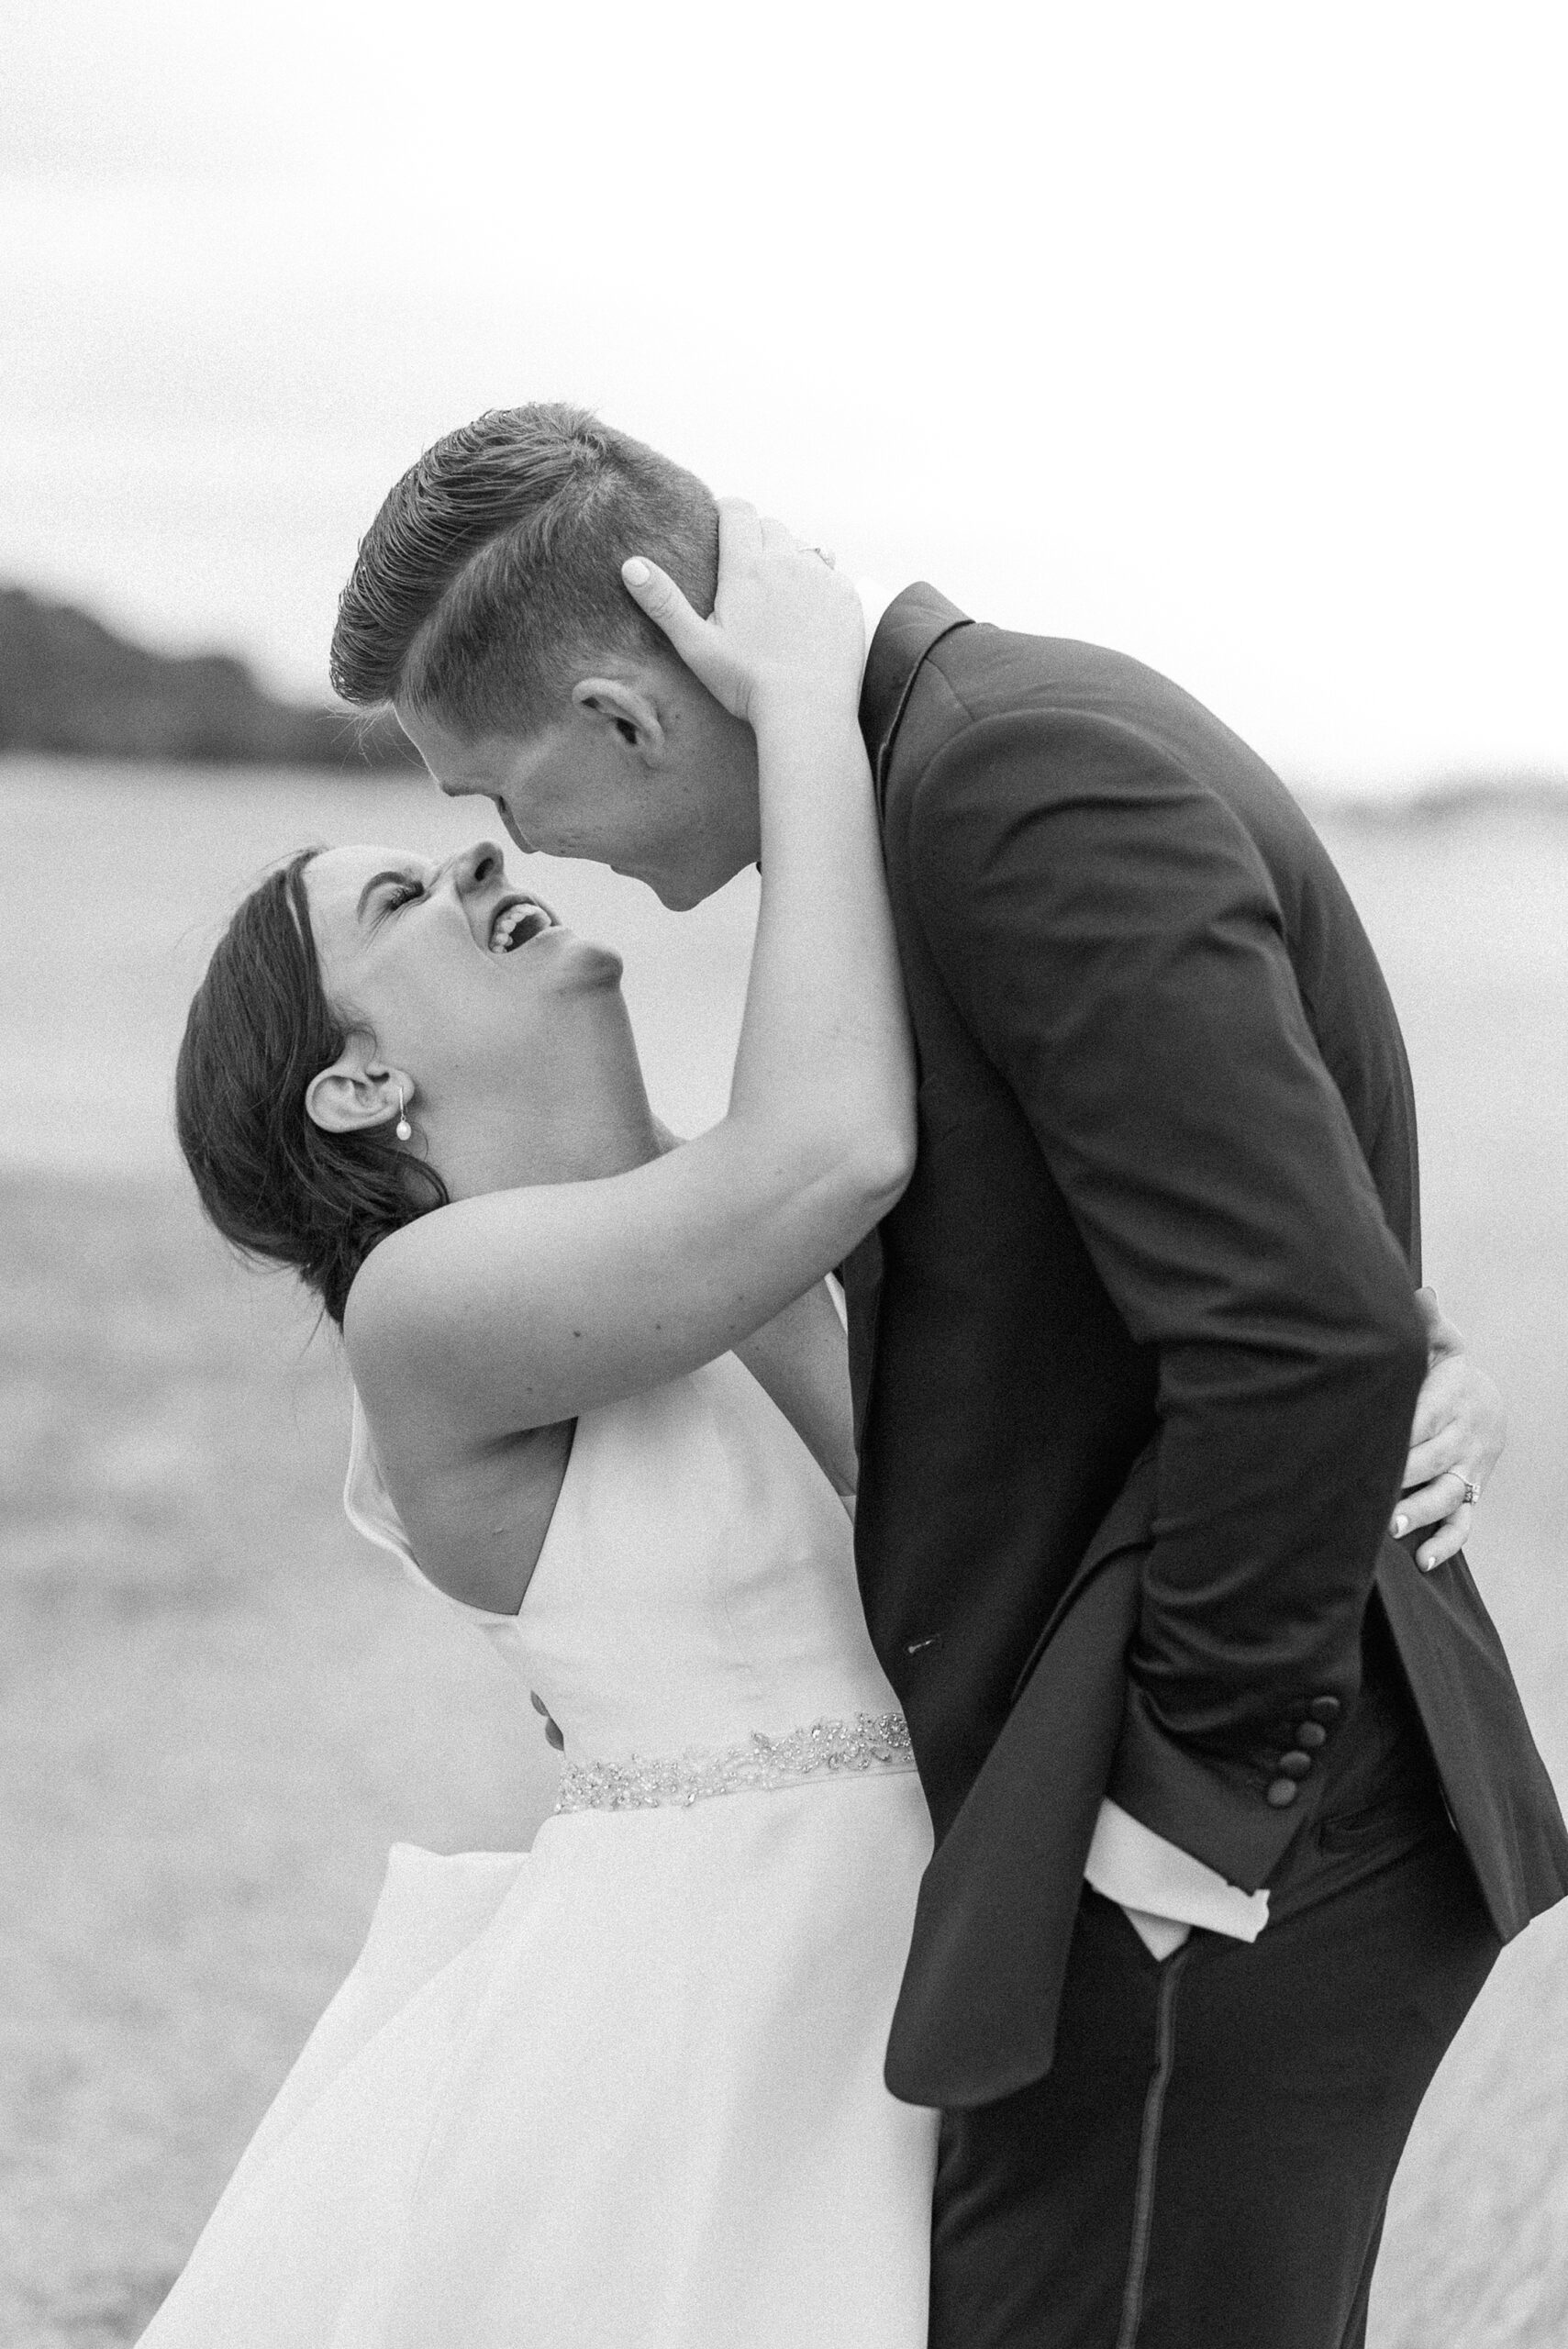 A bride laughs while her groom leans in for a kiss in an open field